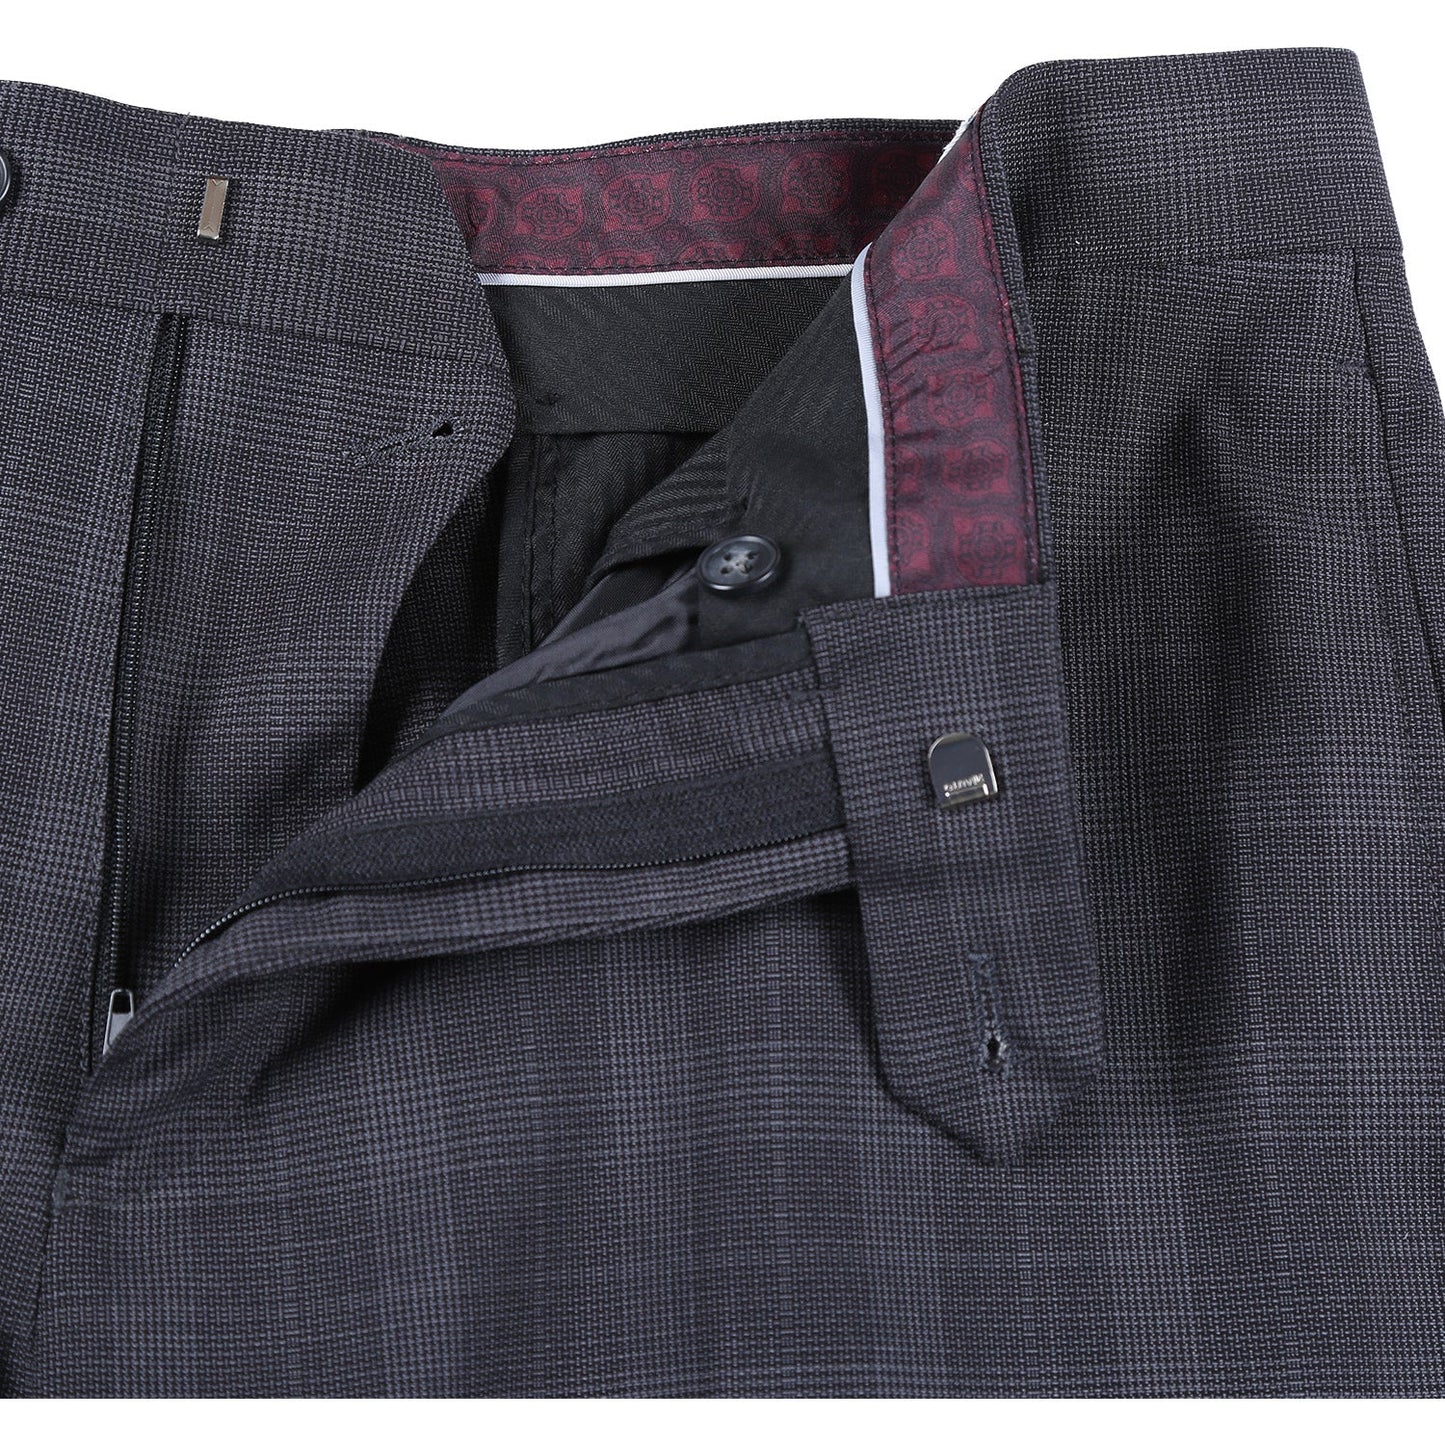 72-52-095EL English Laundry Slim Fit Charcoal Checked Notch Suit